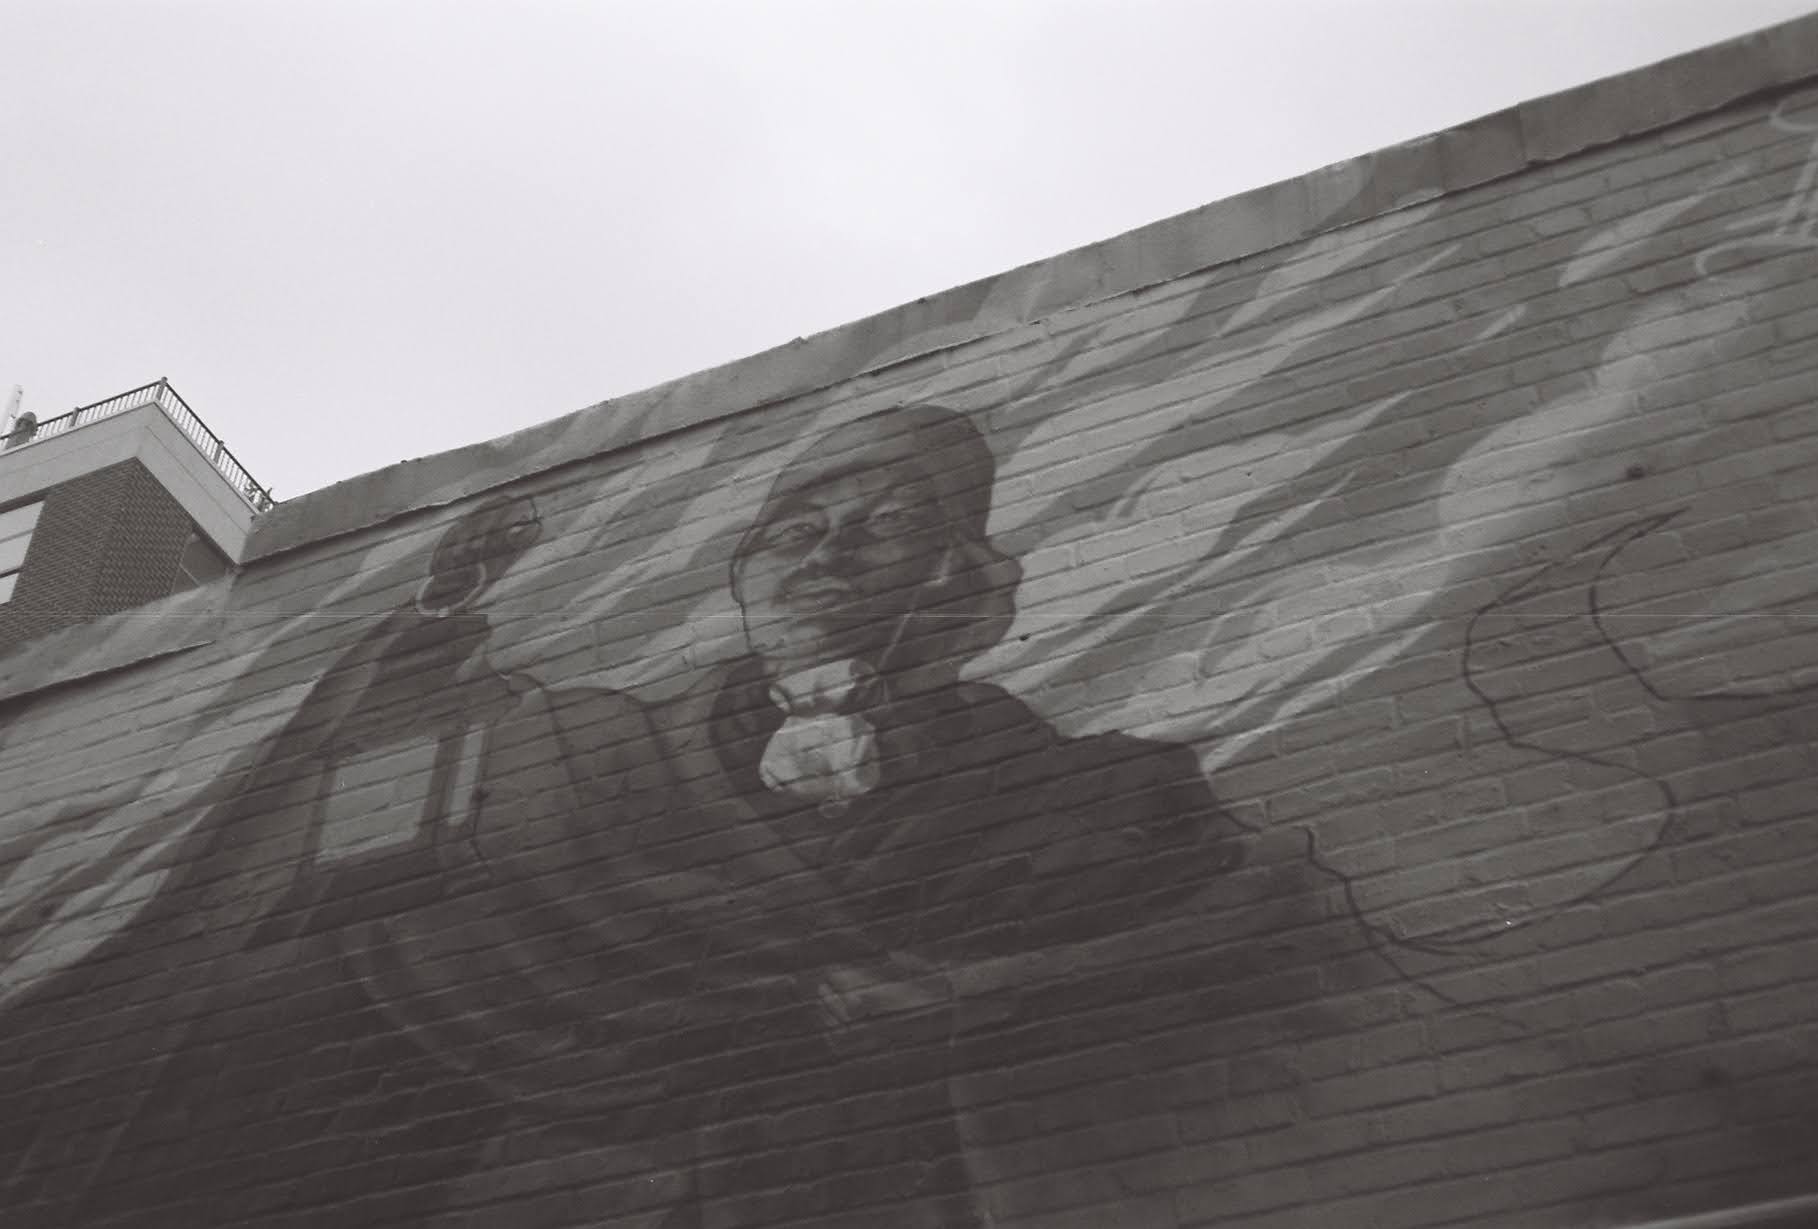 Harriet Tubman painting on the side of a building.